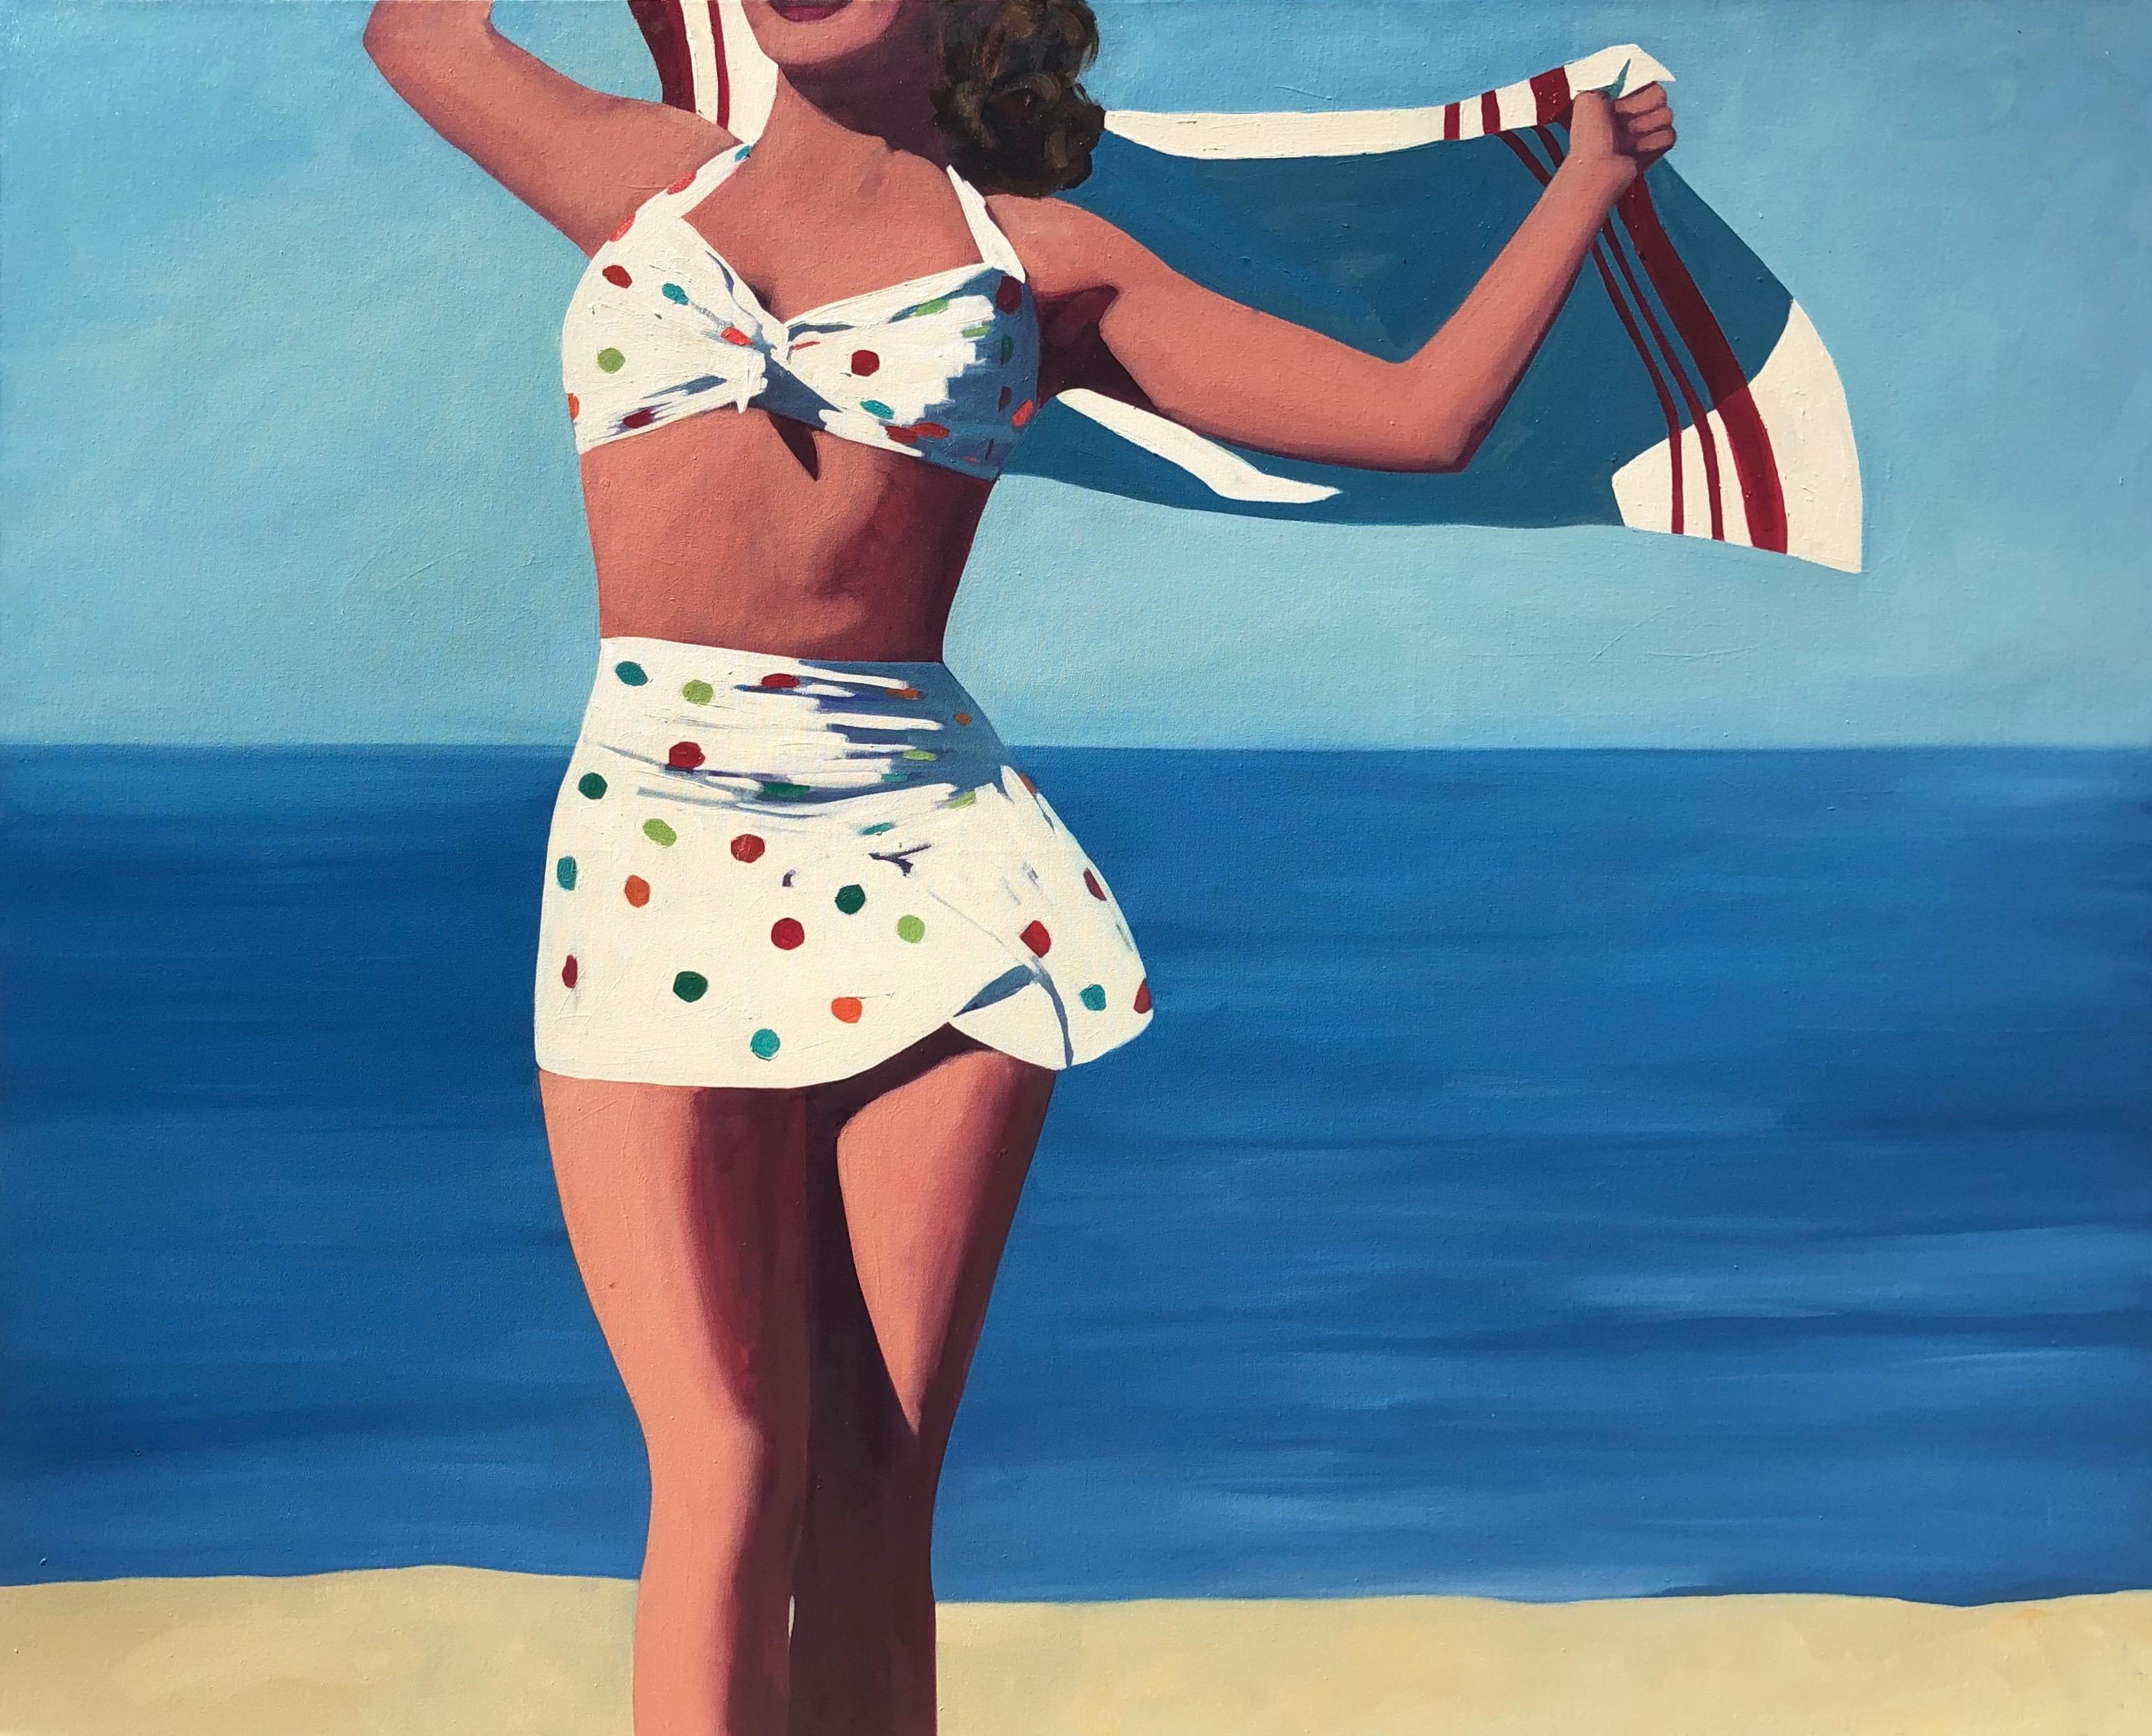 T.S. Harris Figurative Painting - "America" Oil painting of a woman wearing polkadot bikini with a towel behind